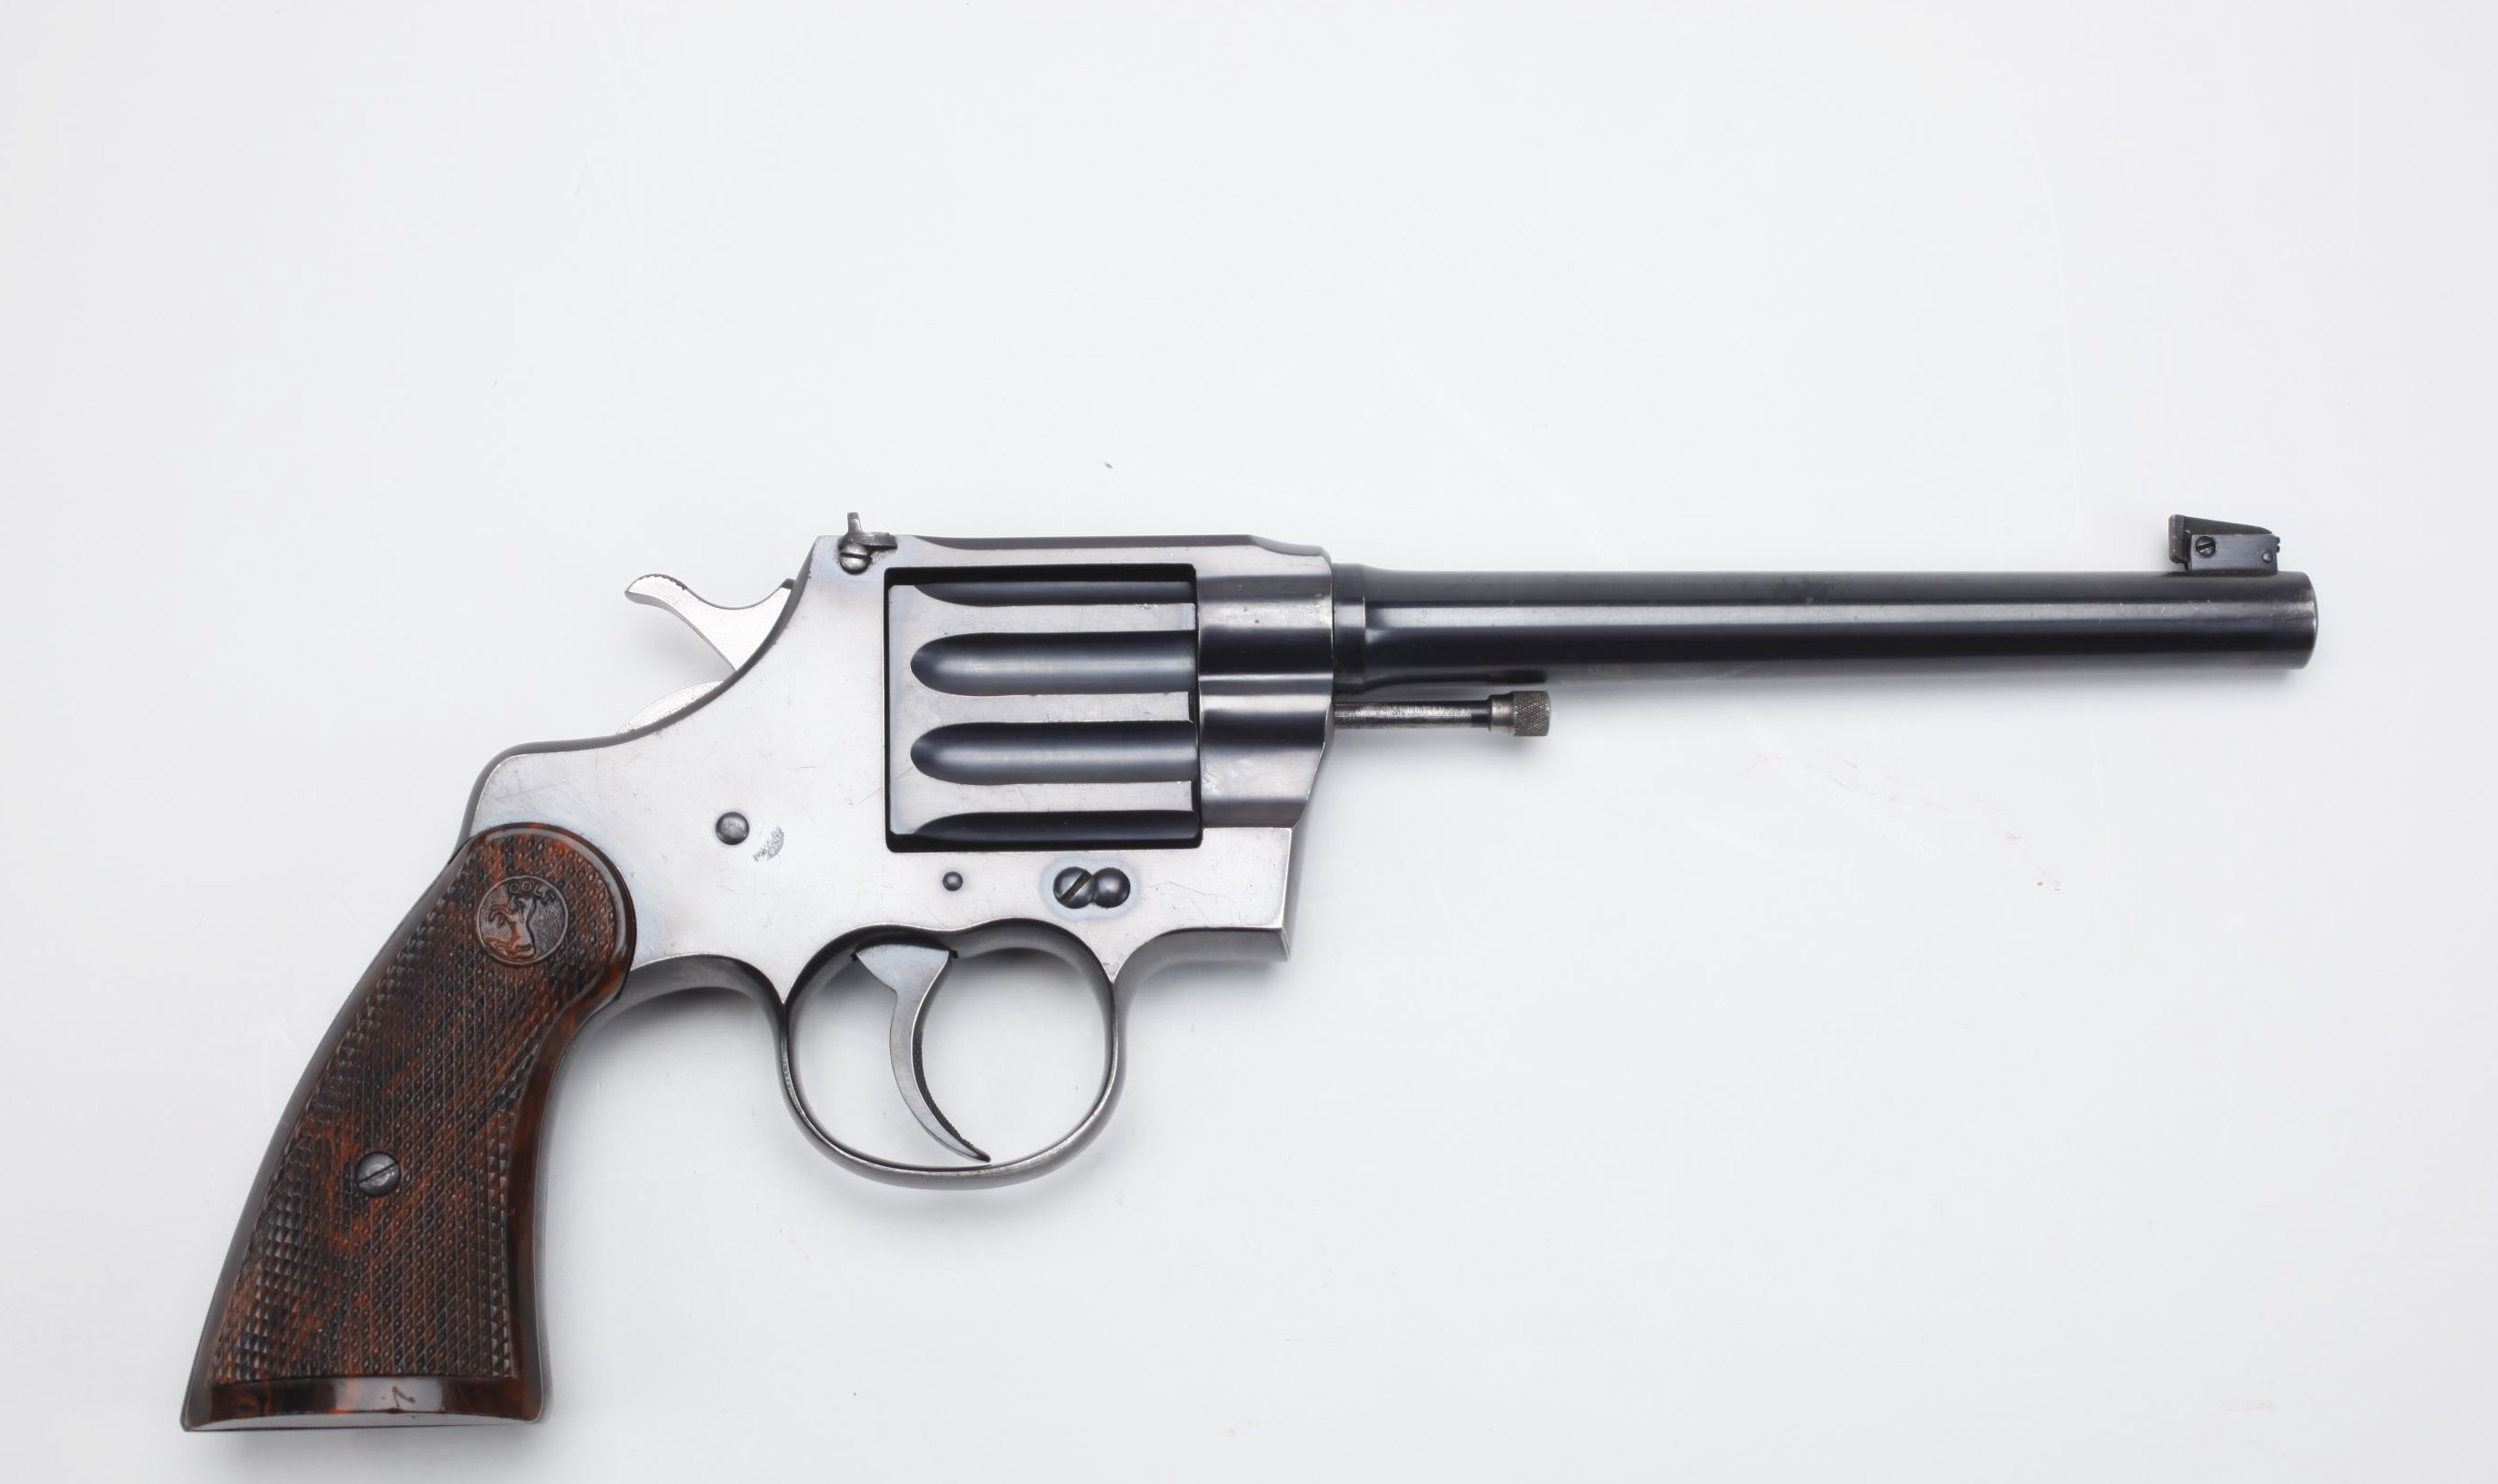 The Colt Camp Perry Pistol